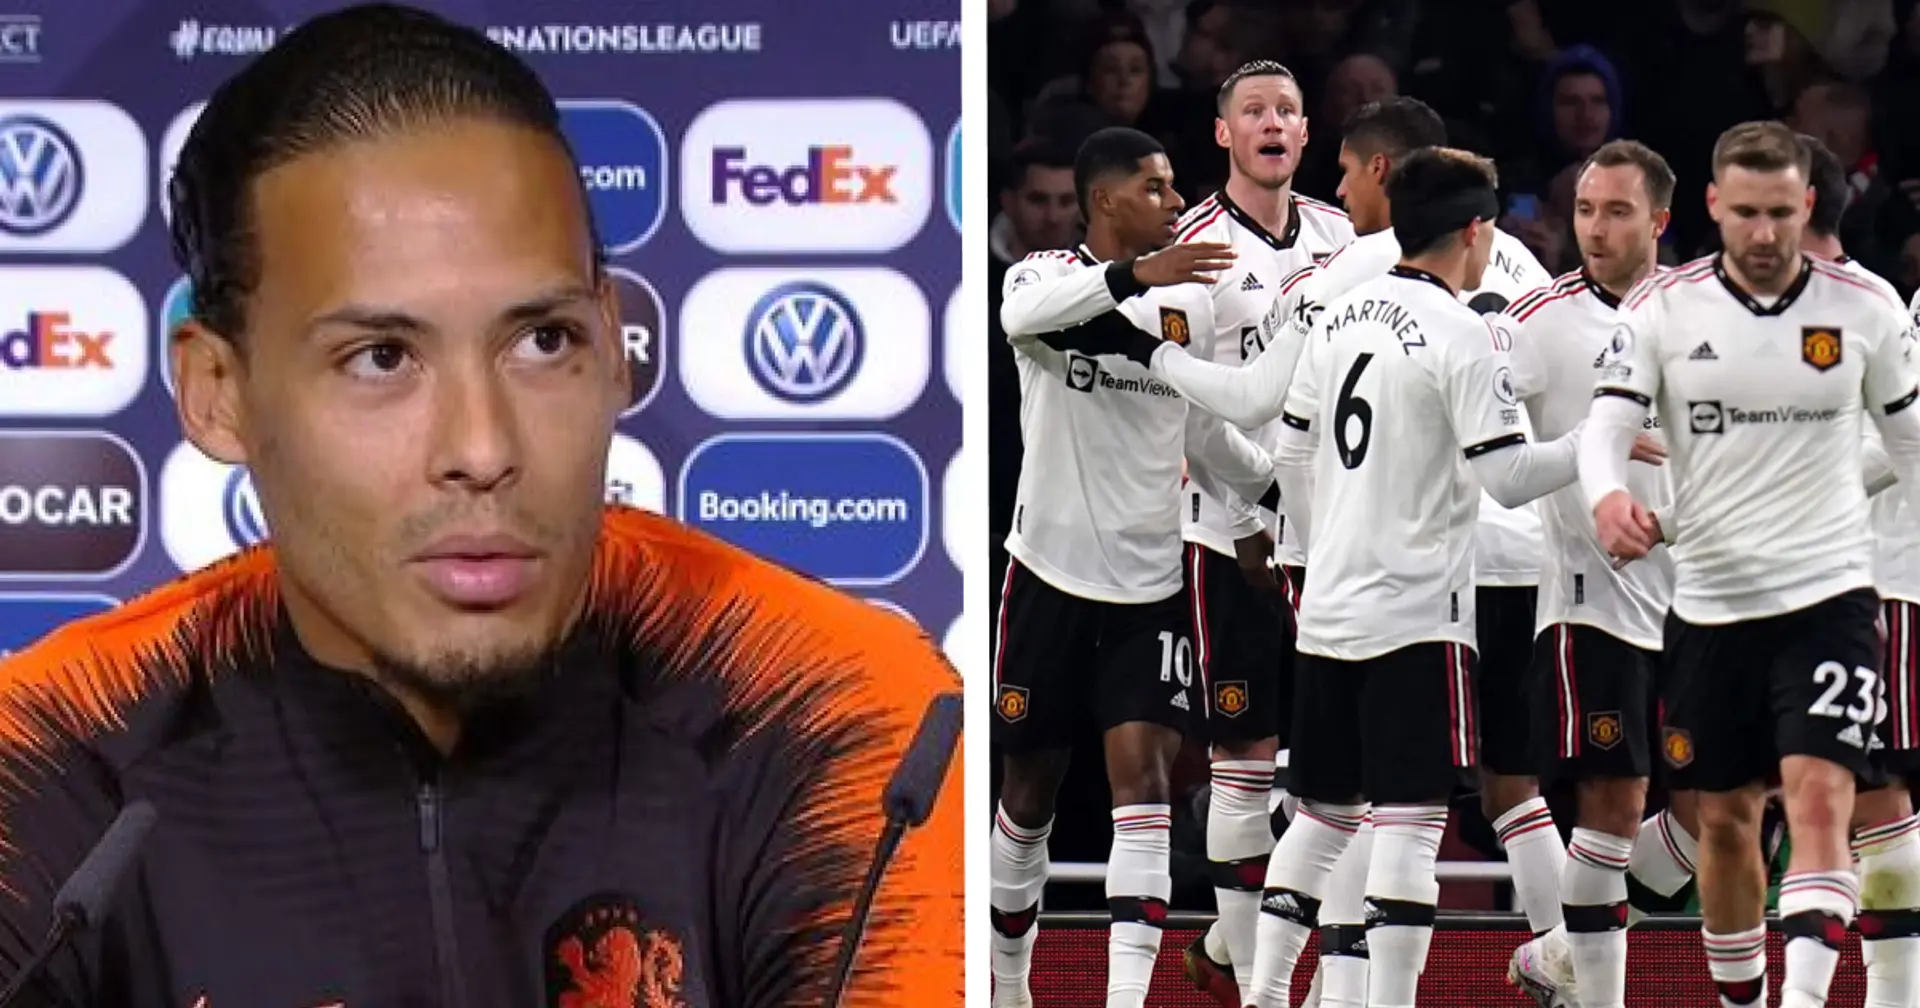 'I find them special': Man United new striker openly declared love for Liverpool before joining them